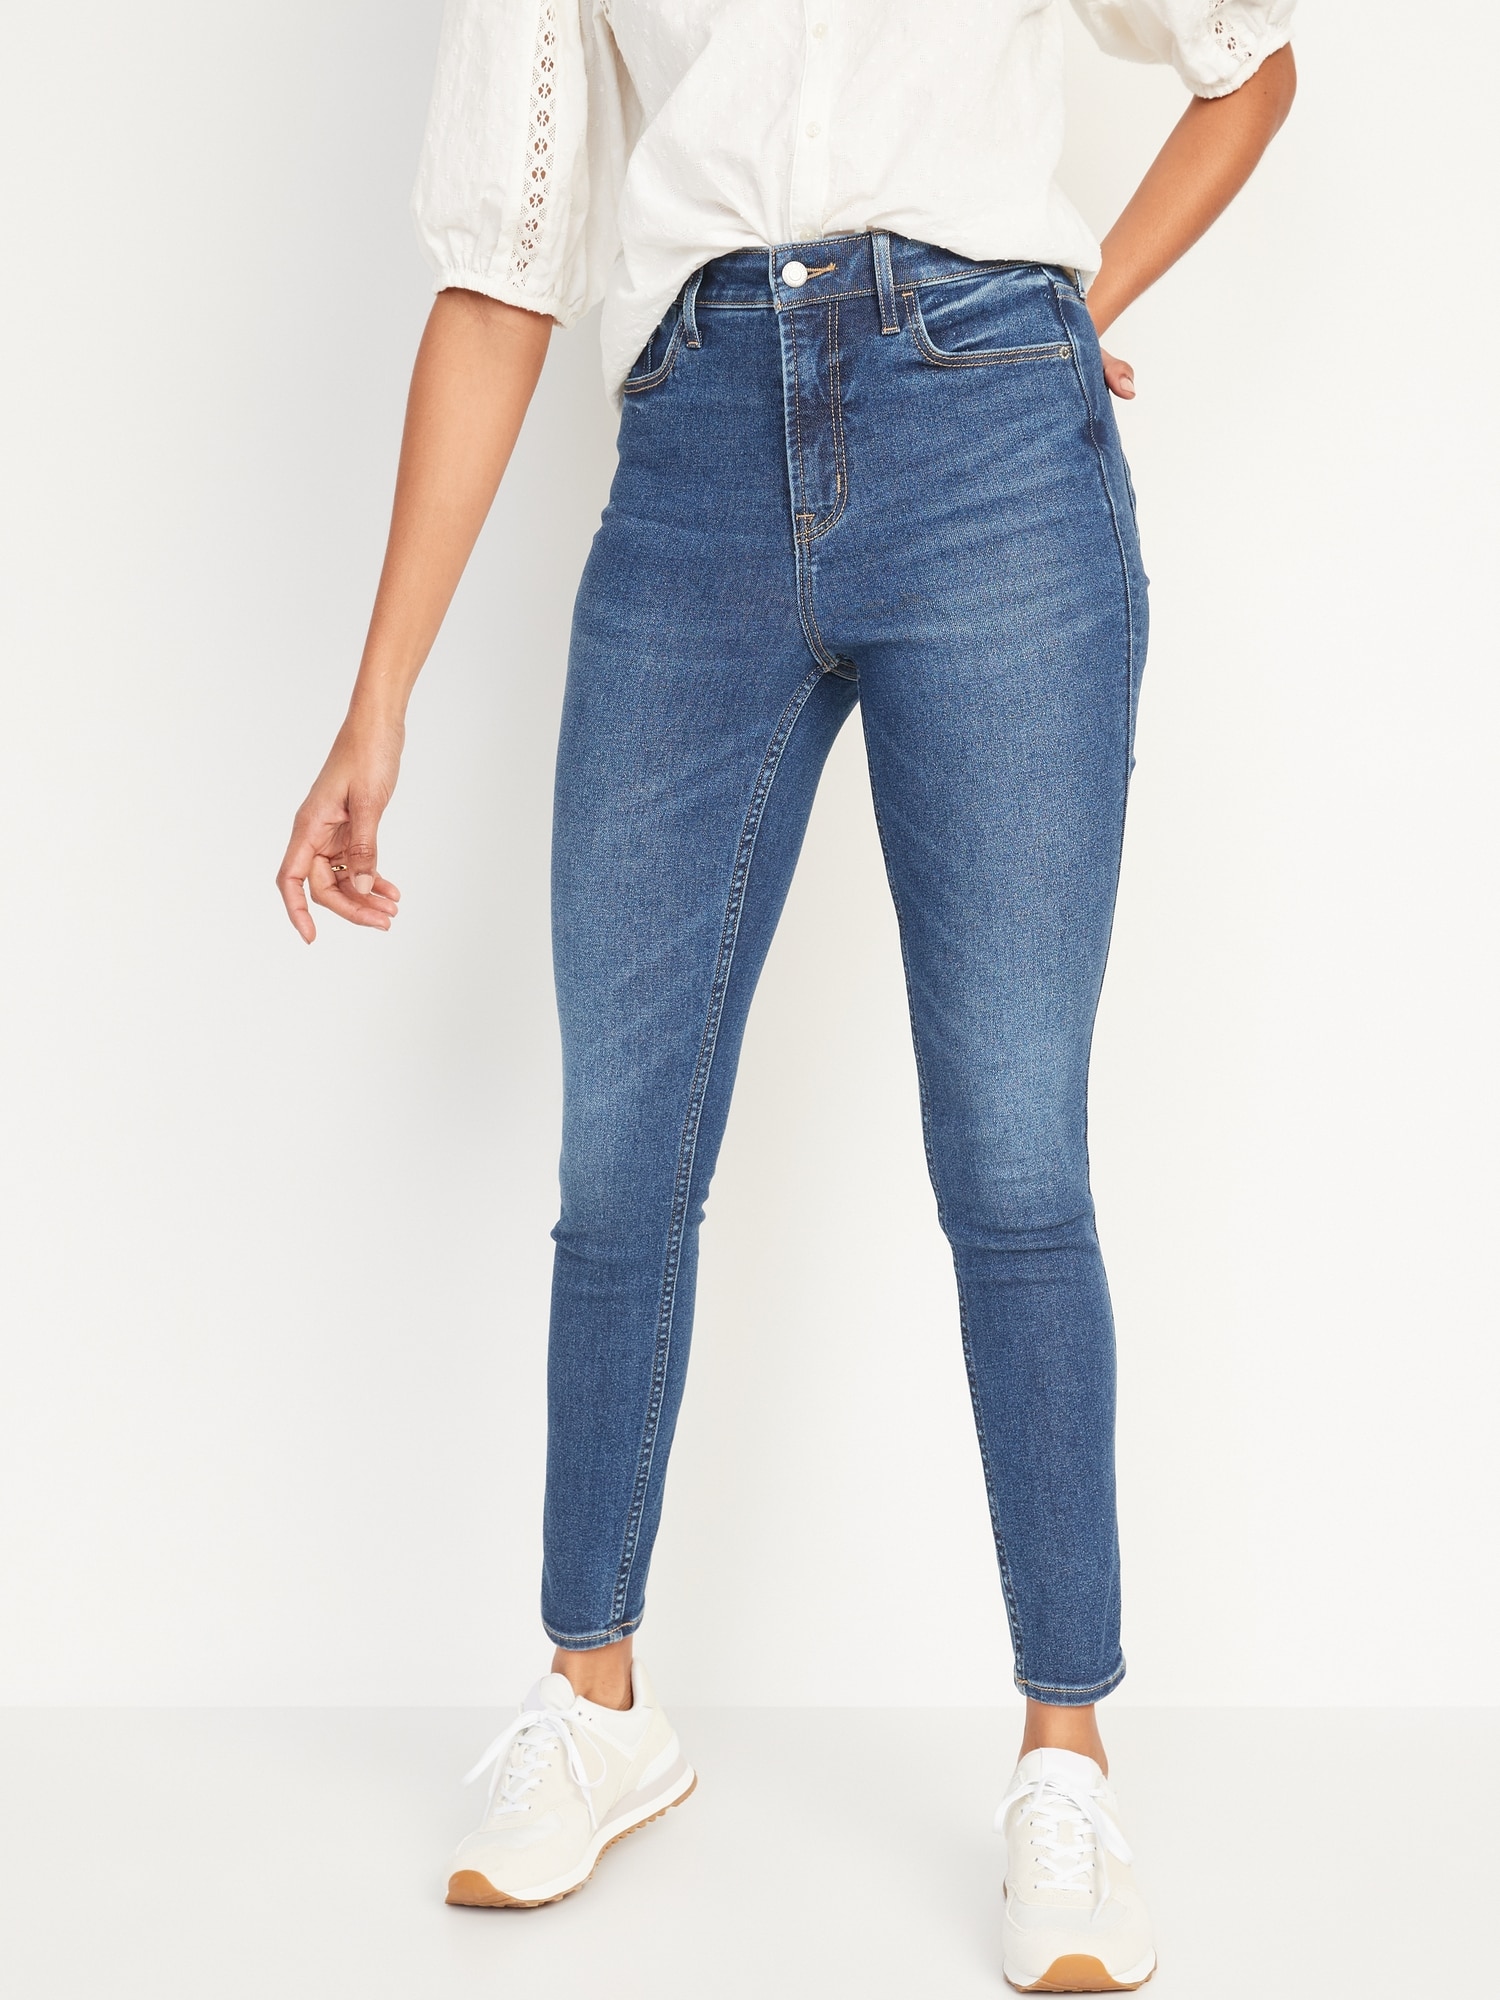 High-Waisted Rockstar 360° Stretch Super Skinny Jeans for Women | Old Navy